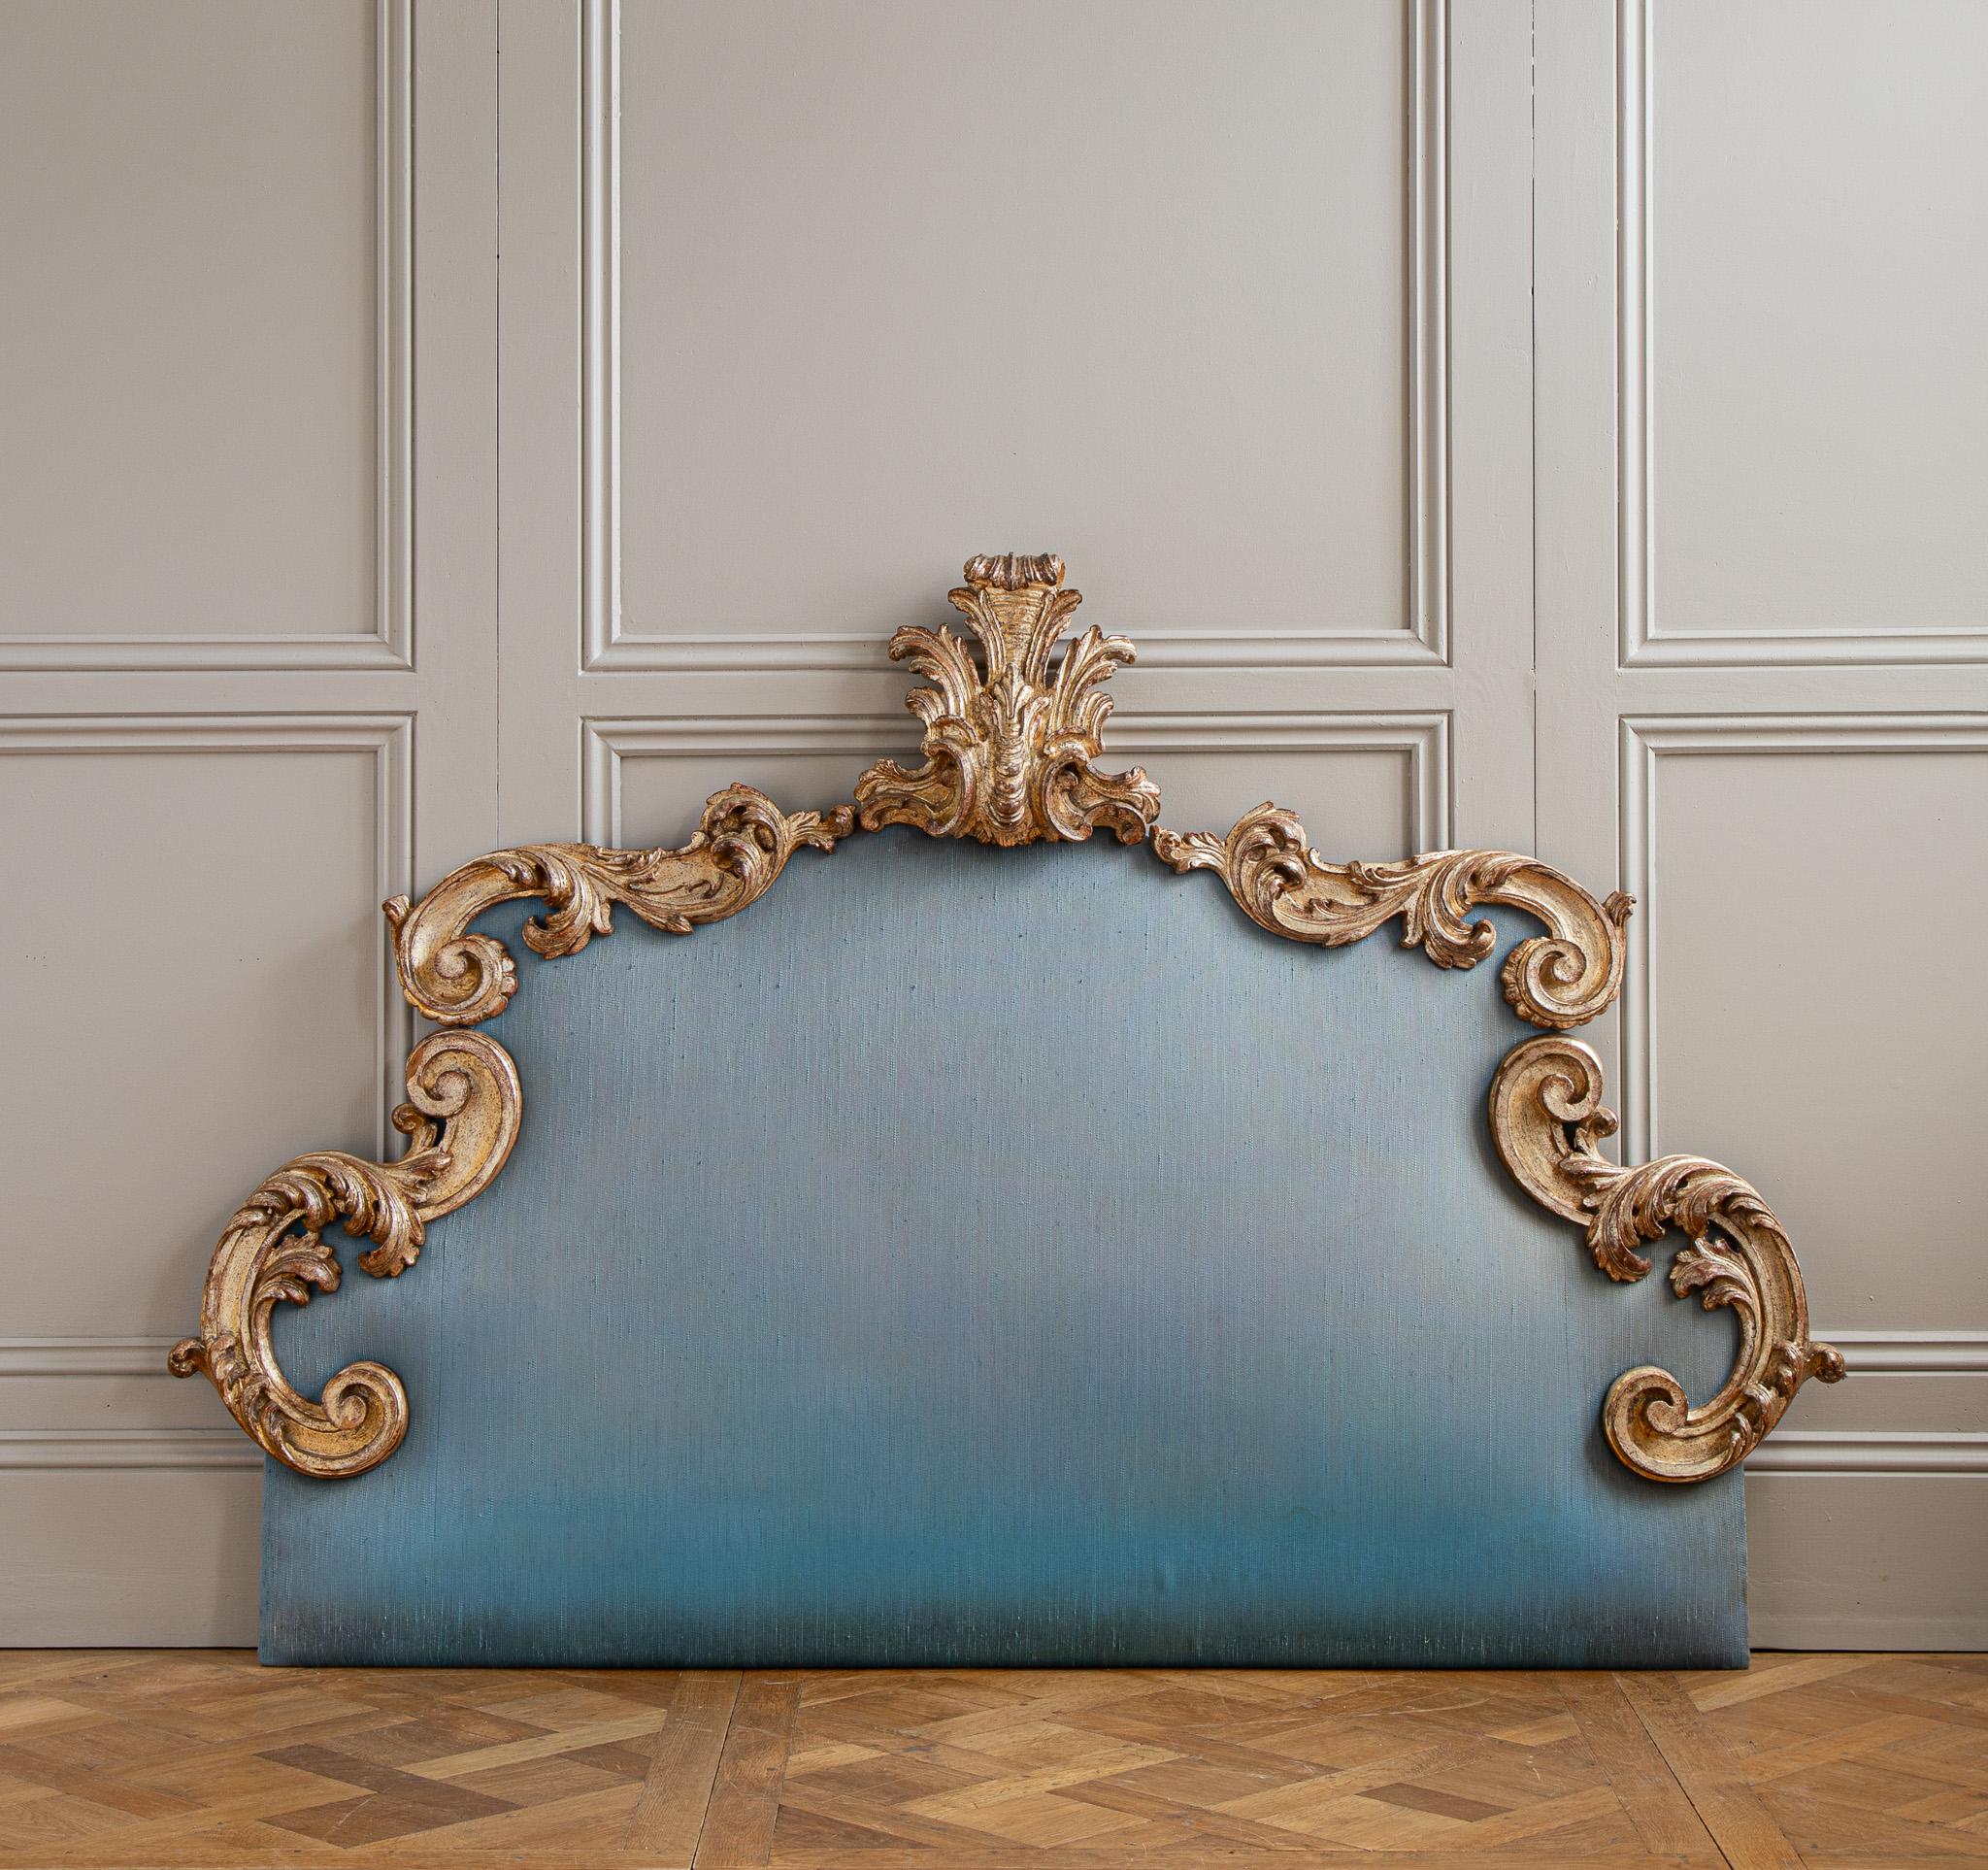 A Large Headboard from Florence, Italy, Circa early 1900's, capturing the ornate elegance of the Rococo period. The headboard is made up of embellished S curves with a large stylised acanthus leaf at its apex for the central motif. The piece is